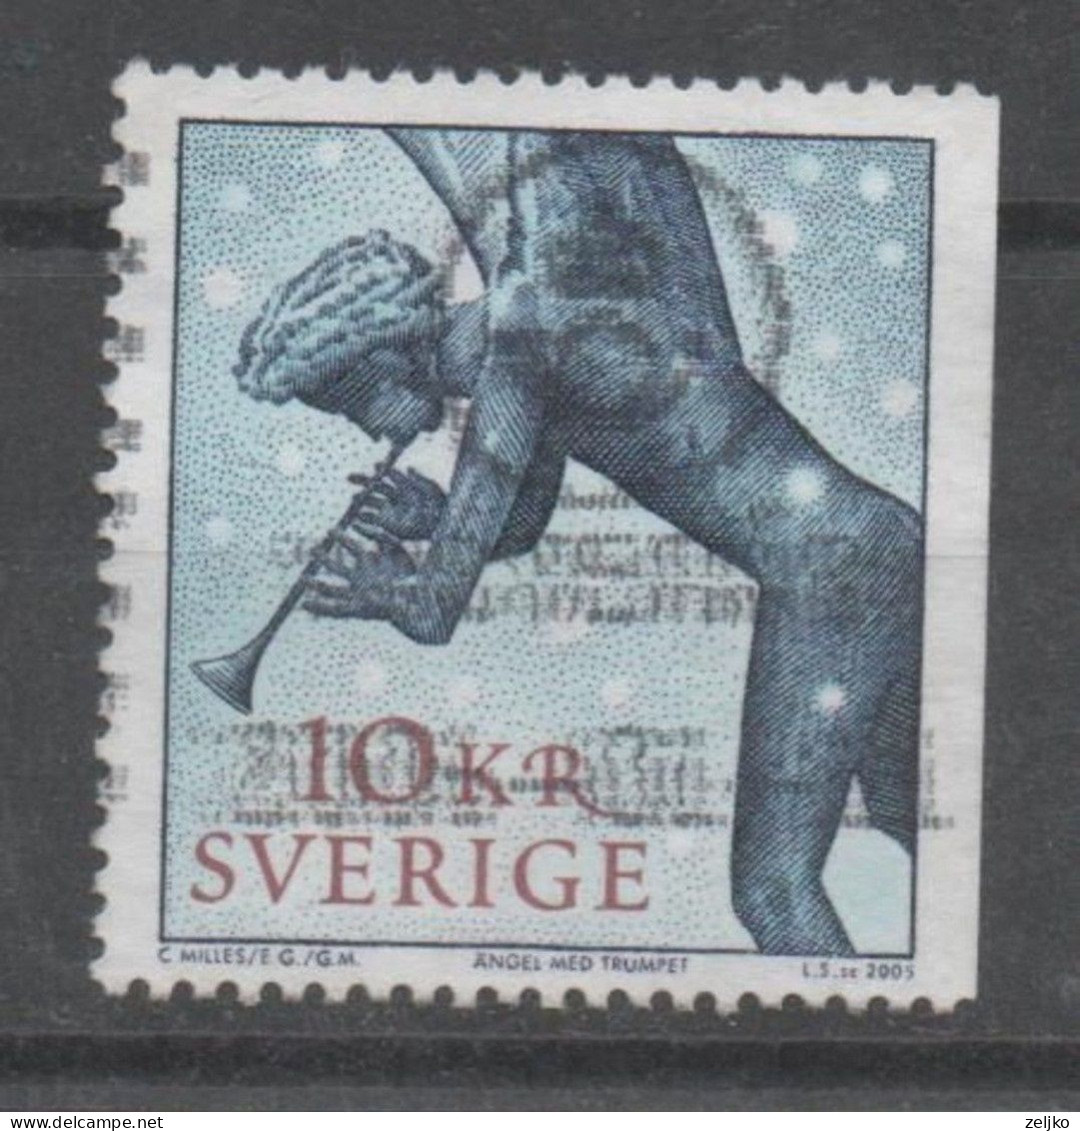 Sweden, Used, 2005, Michel 2507, Angel With Trumpet - Used Stamps